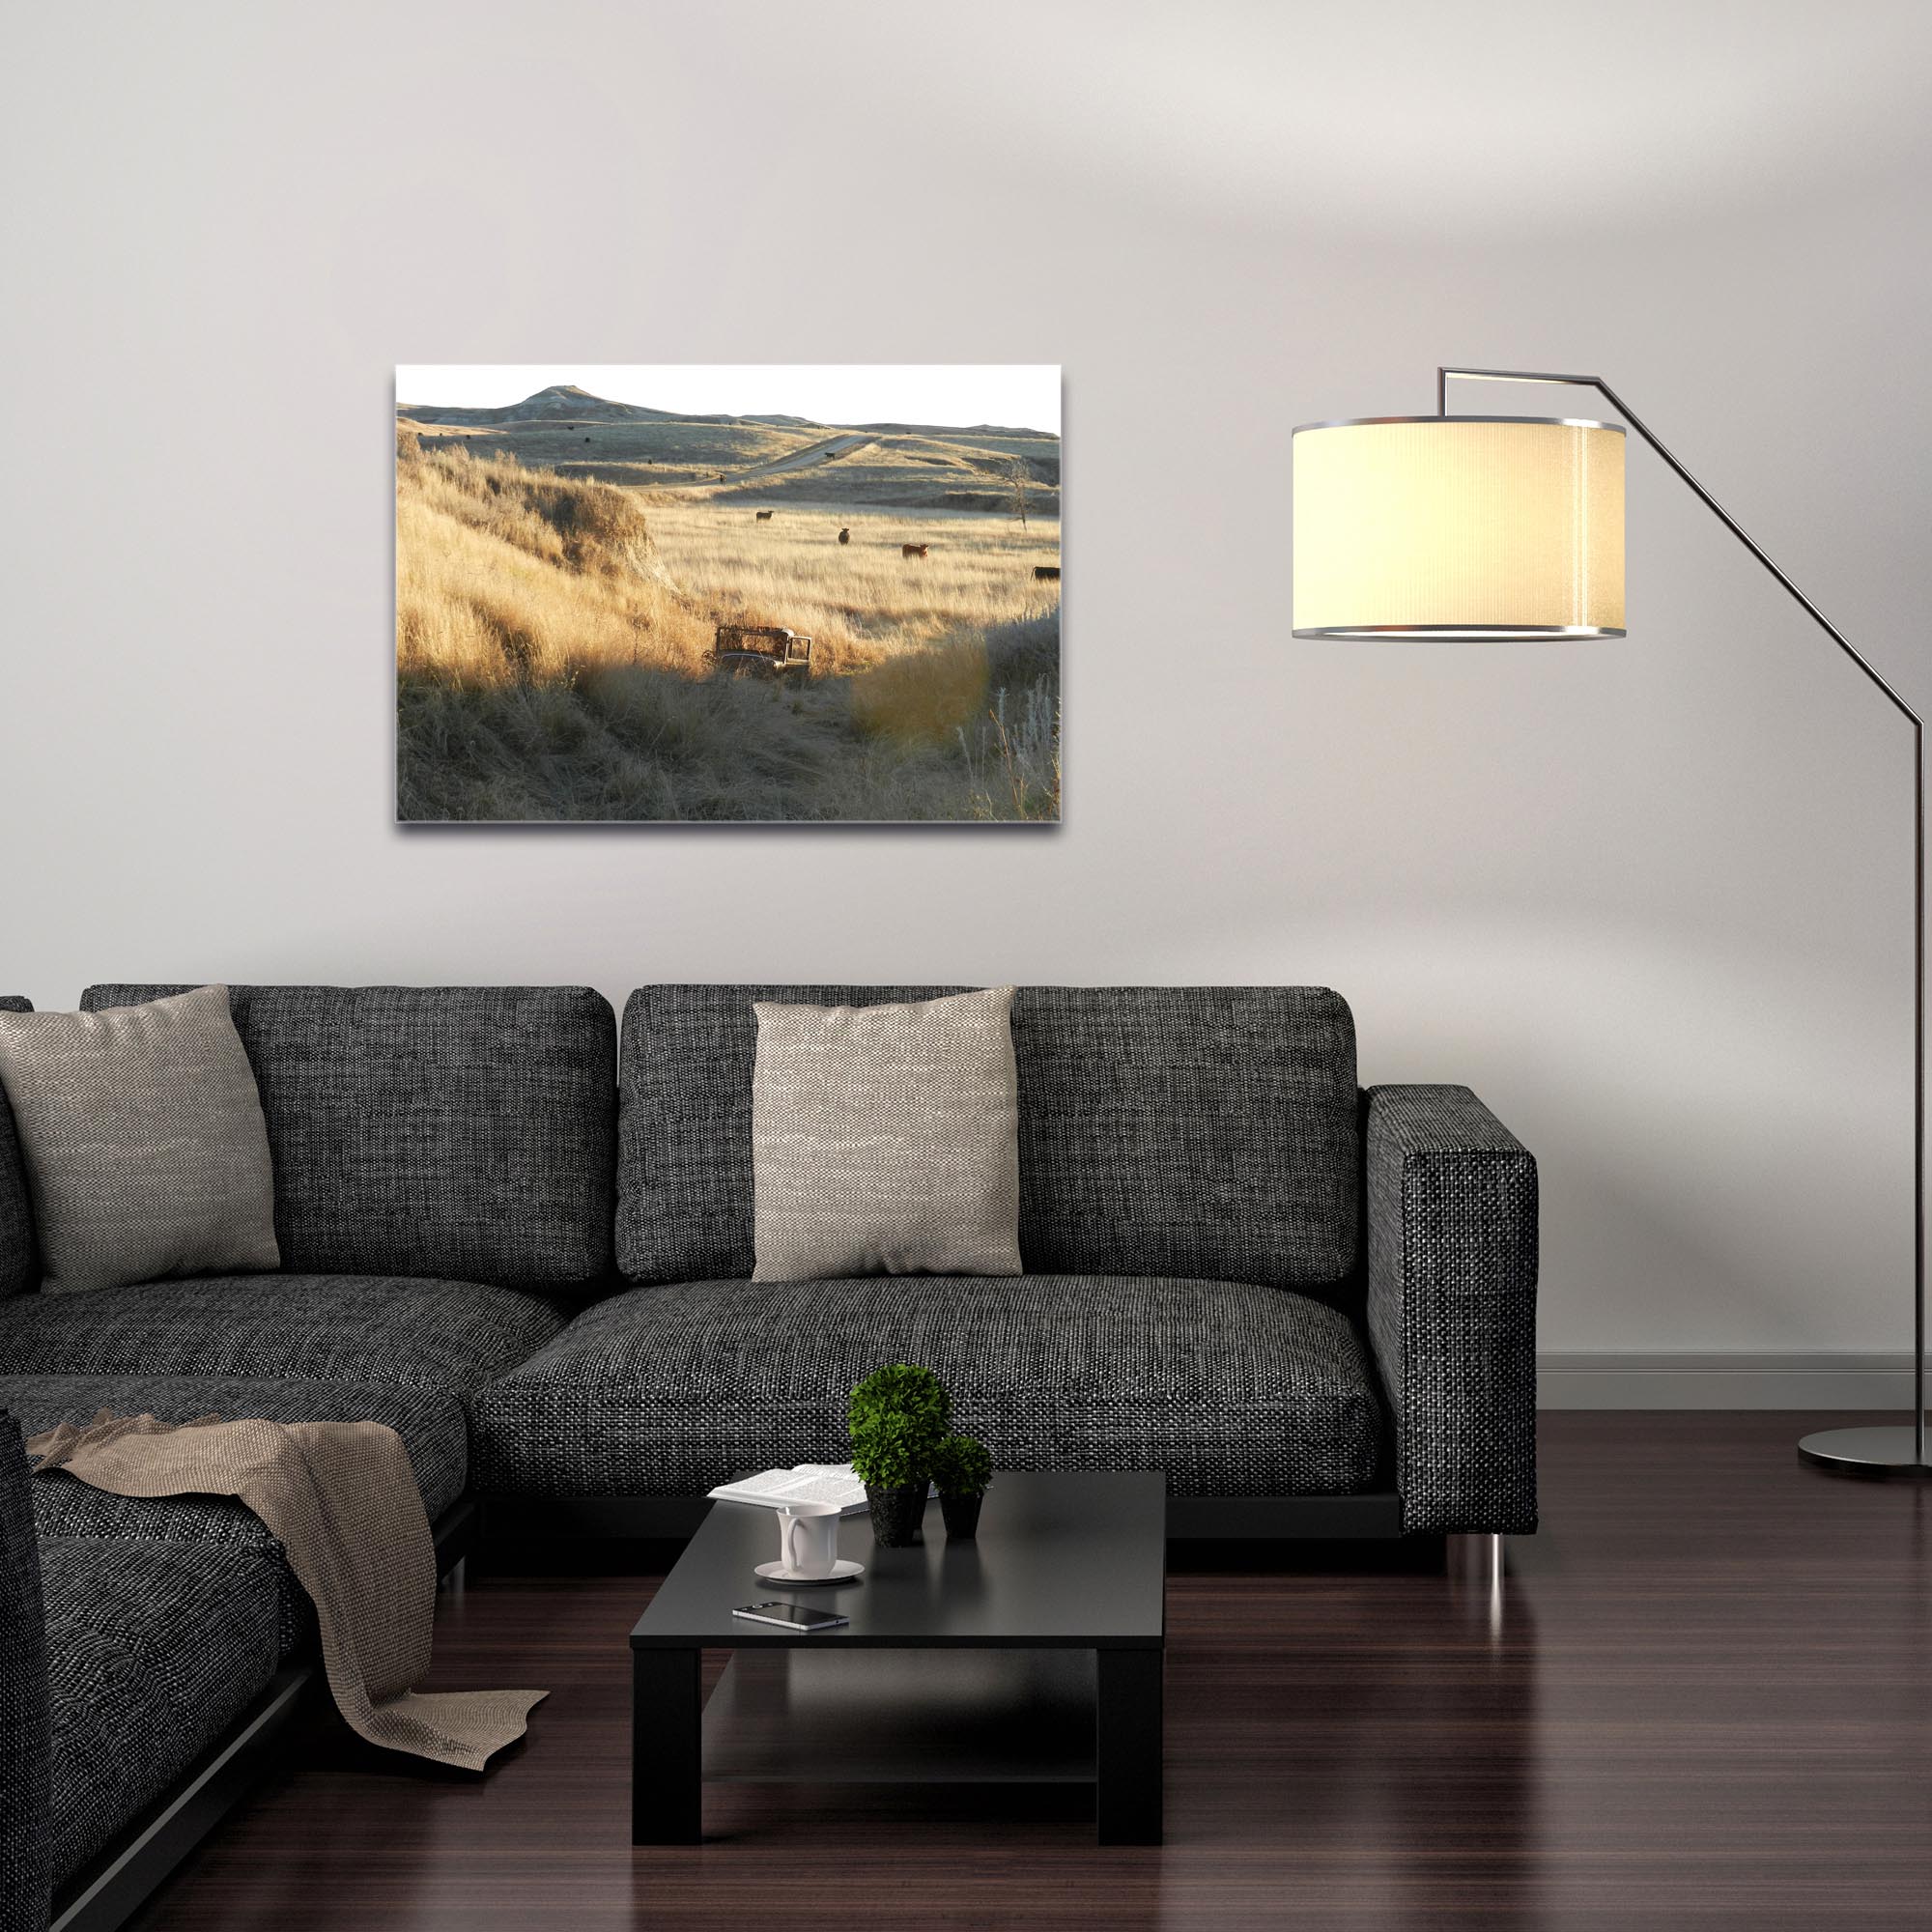 Western Wall Art 'Out West' - American West Decor on Metal or Plexiglass - Image 3